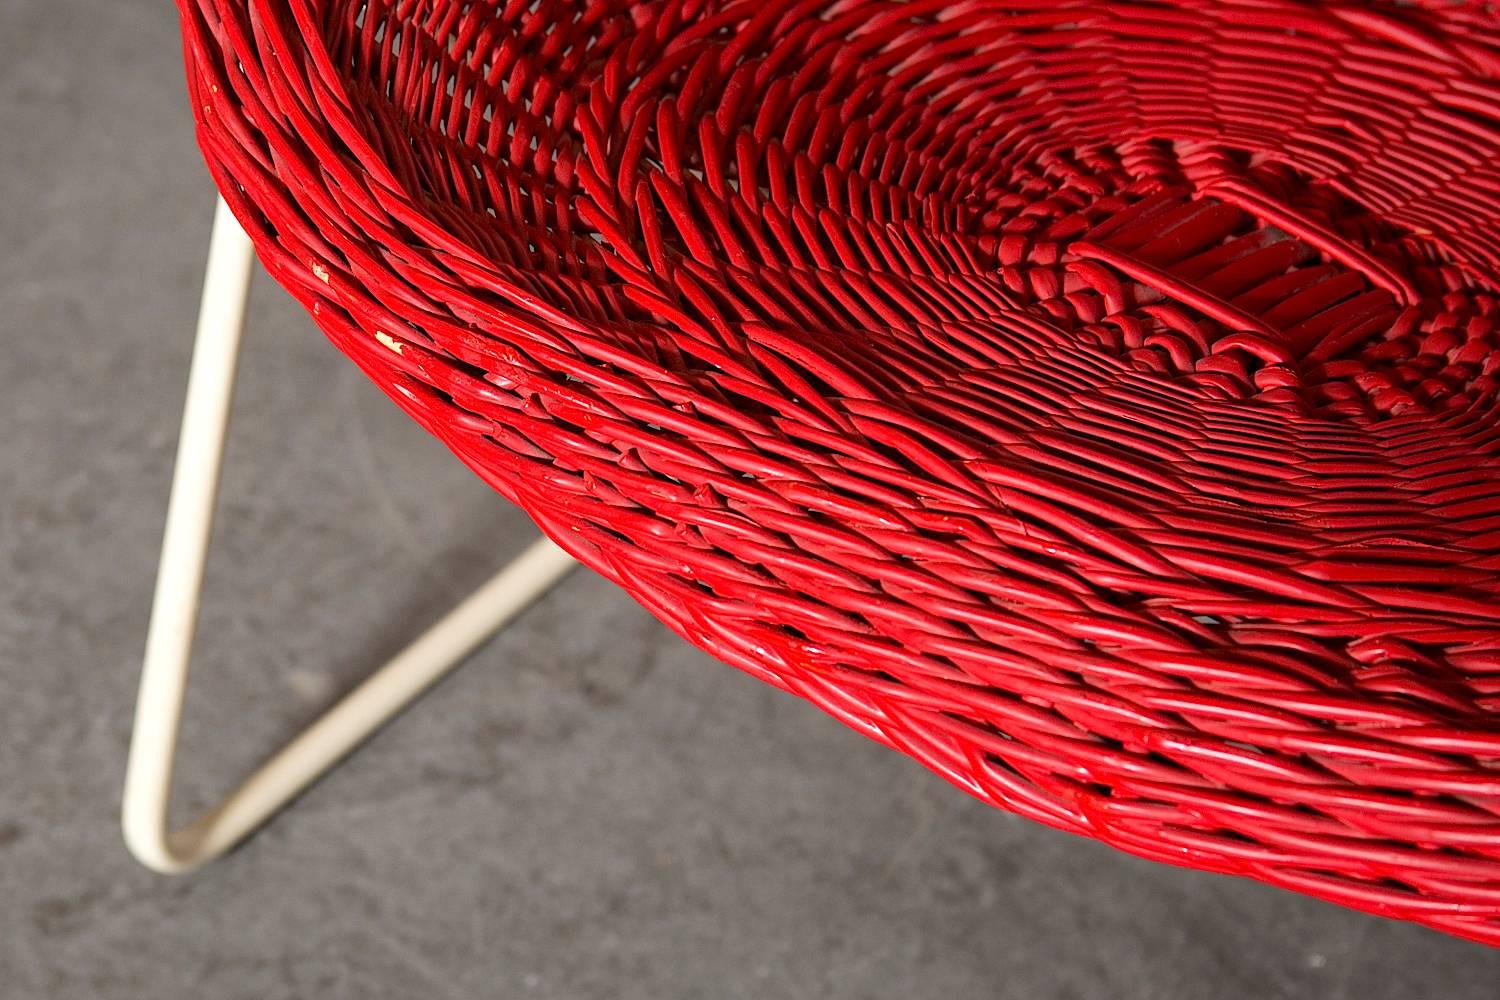 Powder-Coated Jacques Adnet Inspired Red Woven Rattan and Wire Hoop Chair For Sale